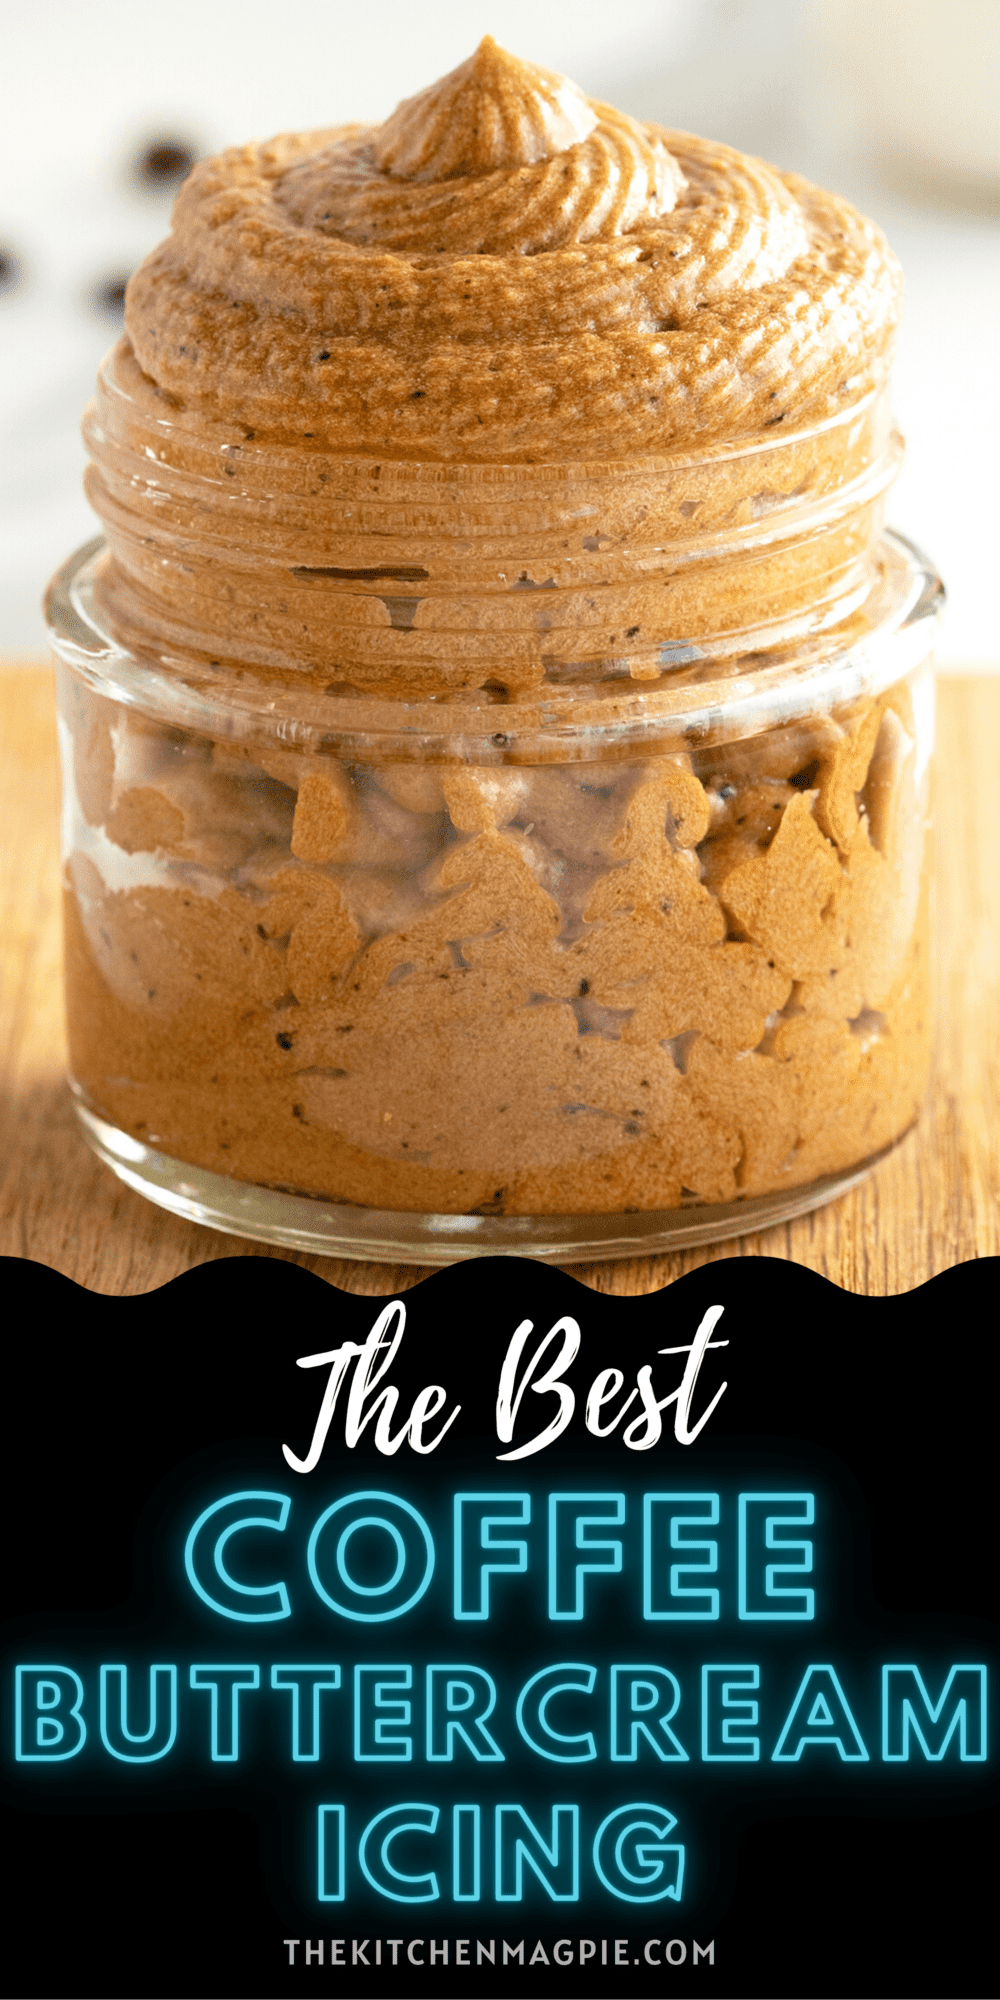 This coffee buttercream frosting will be perfect on cupcakes and makes them smell like a freshly brewed espresso.